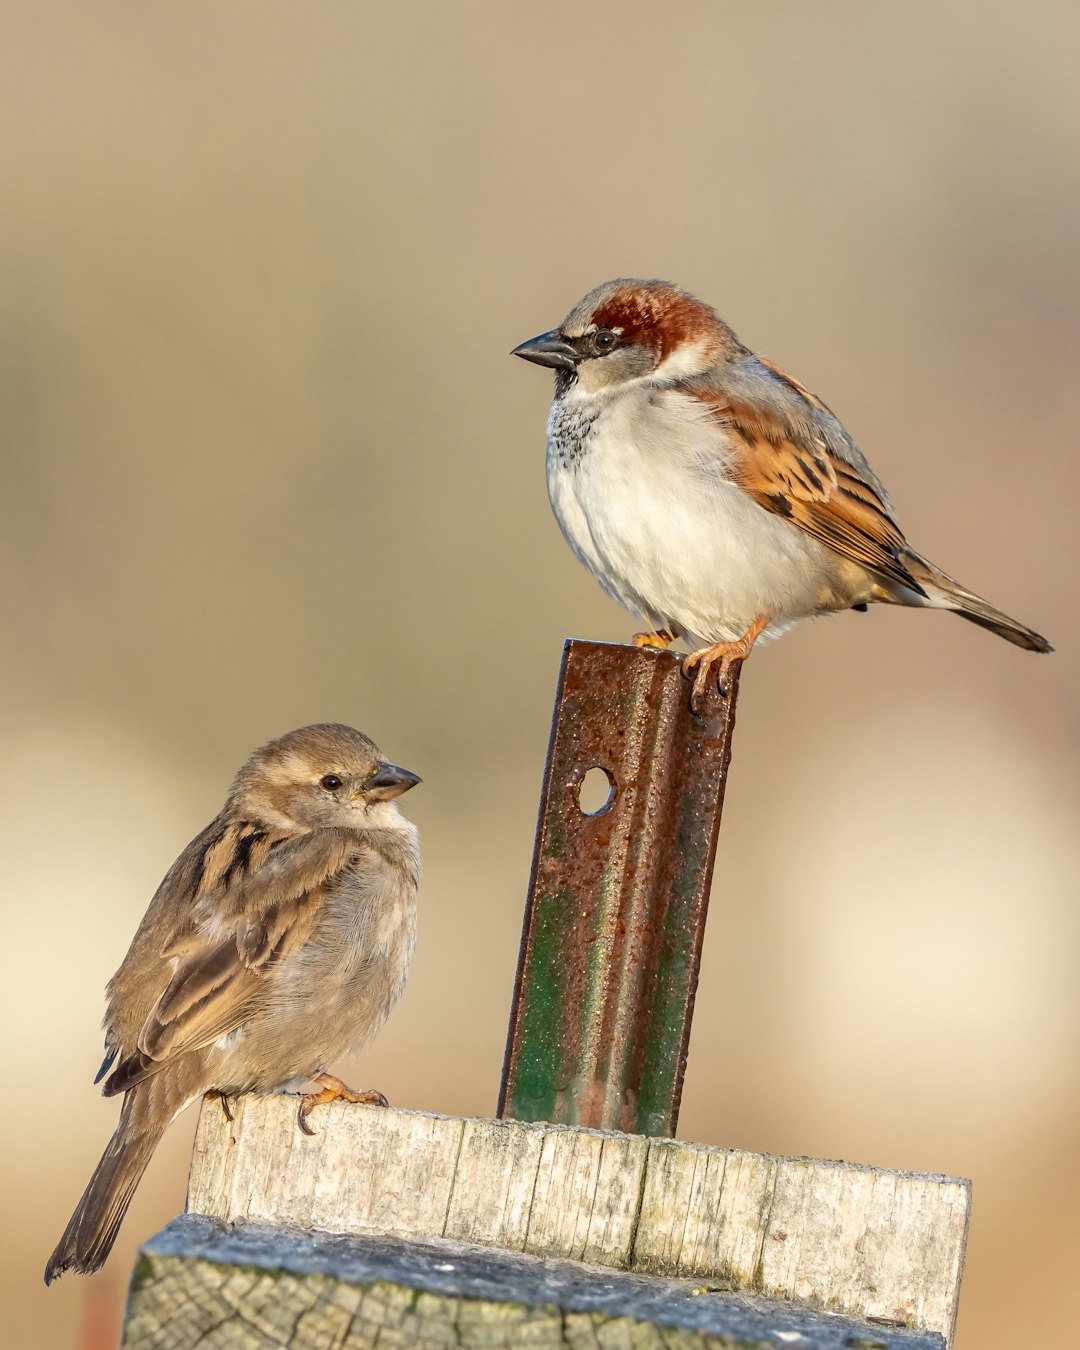  brown and white bird on black metal fence sparrow